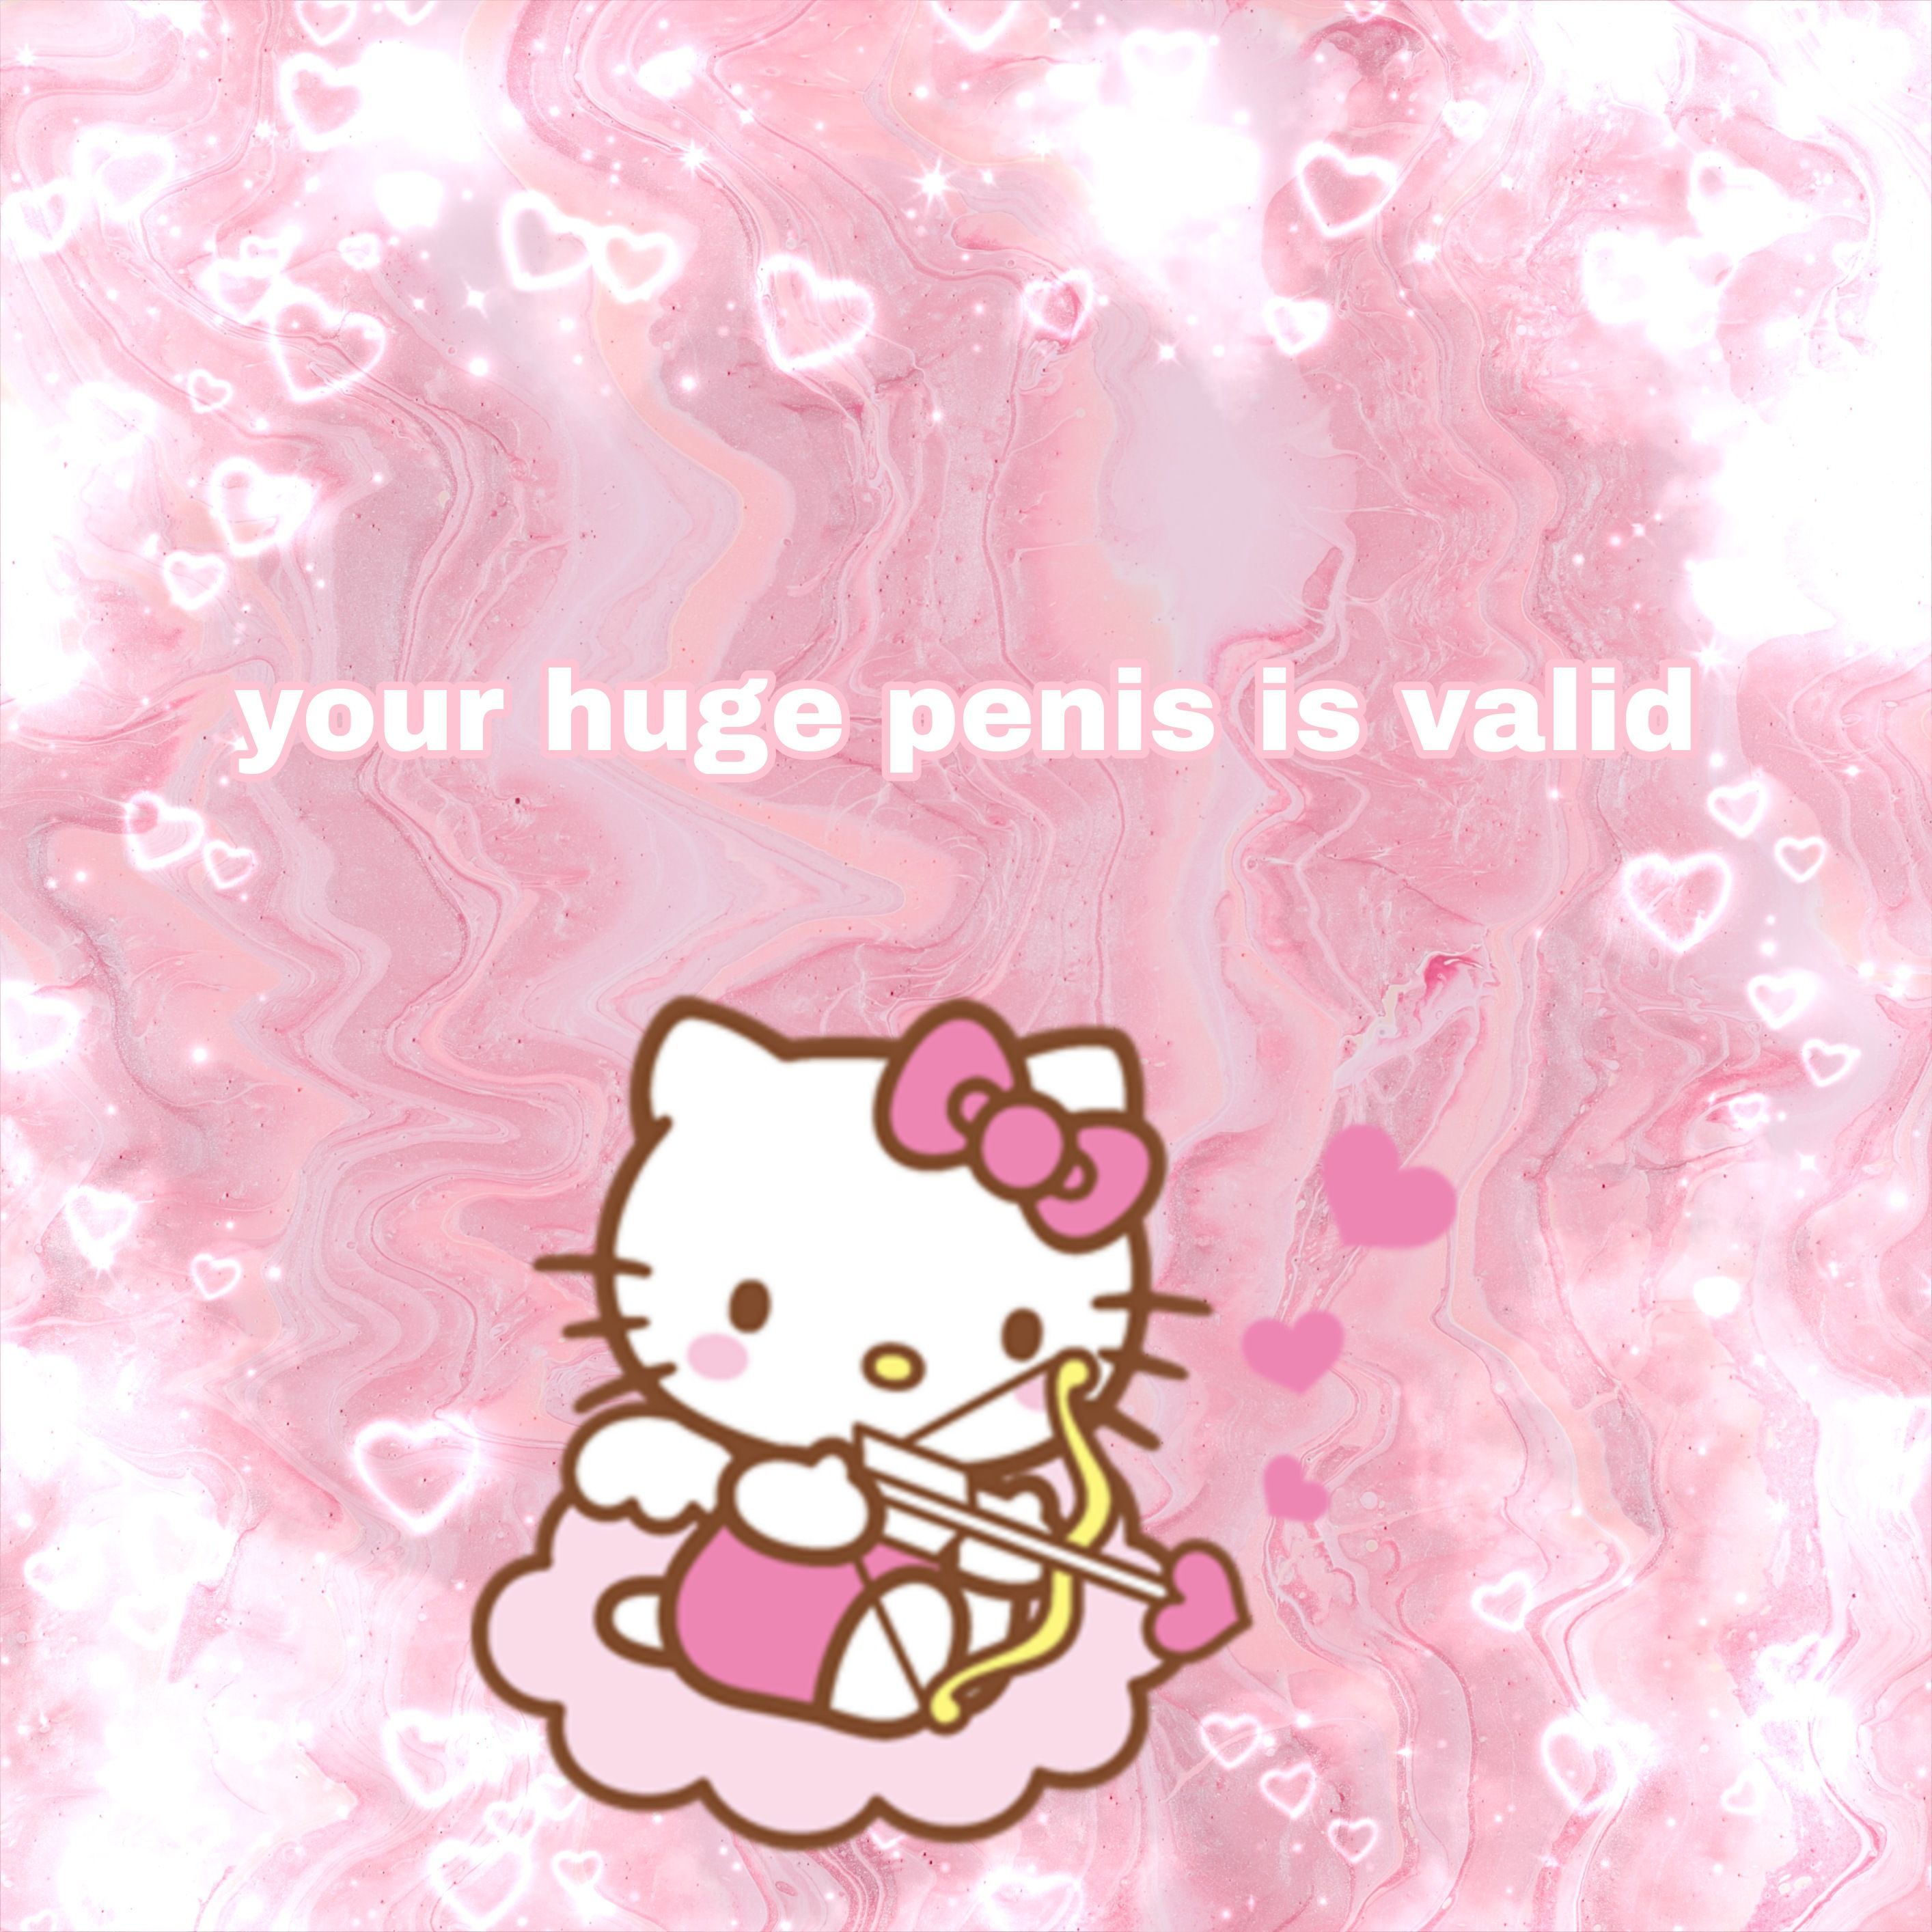 Pink hello kitty wallpaper with the words 